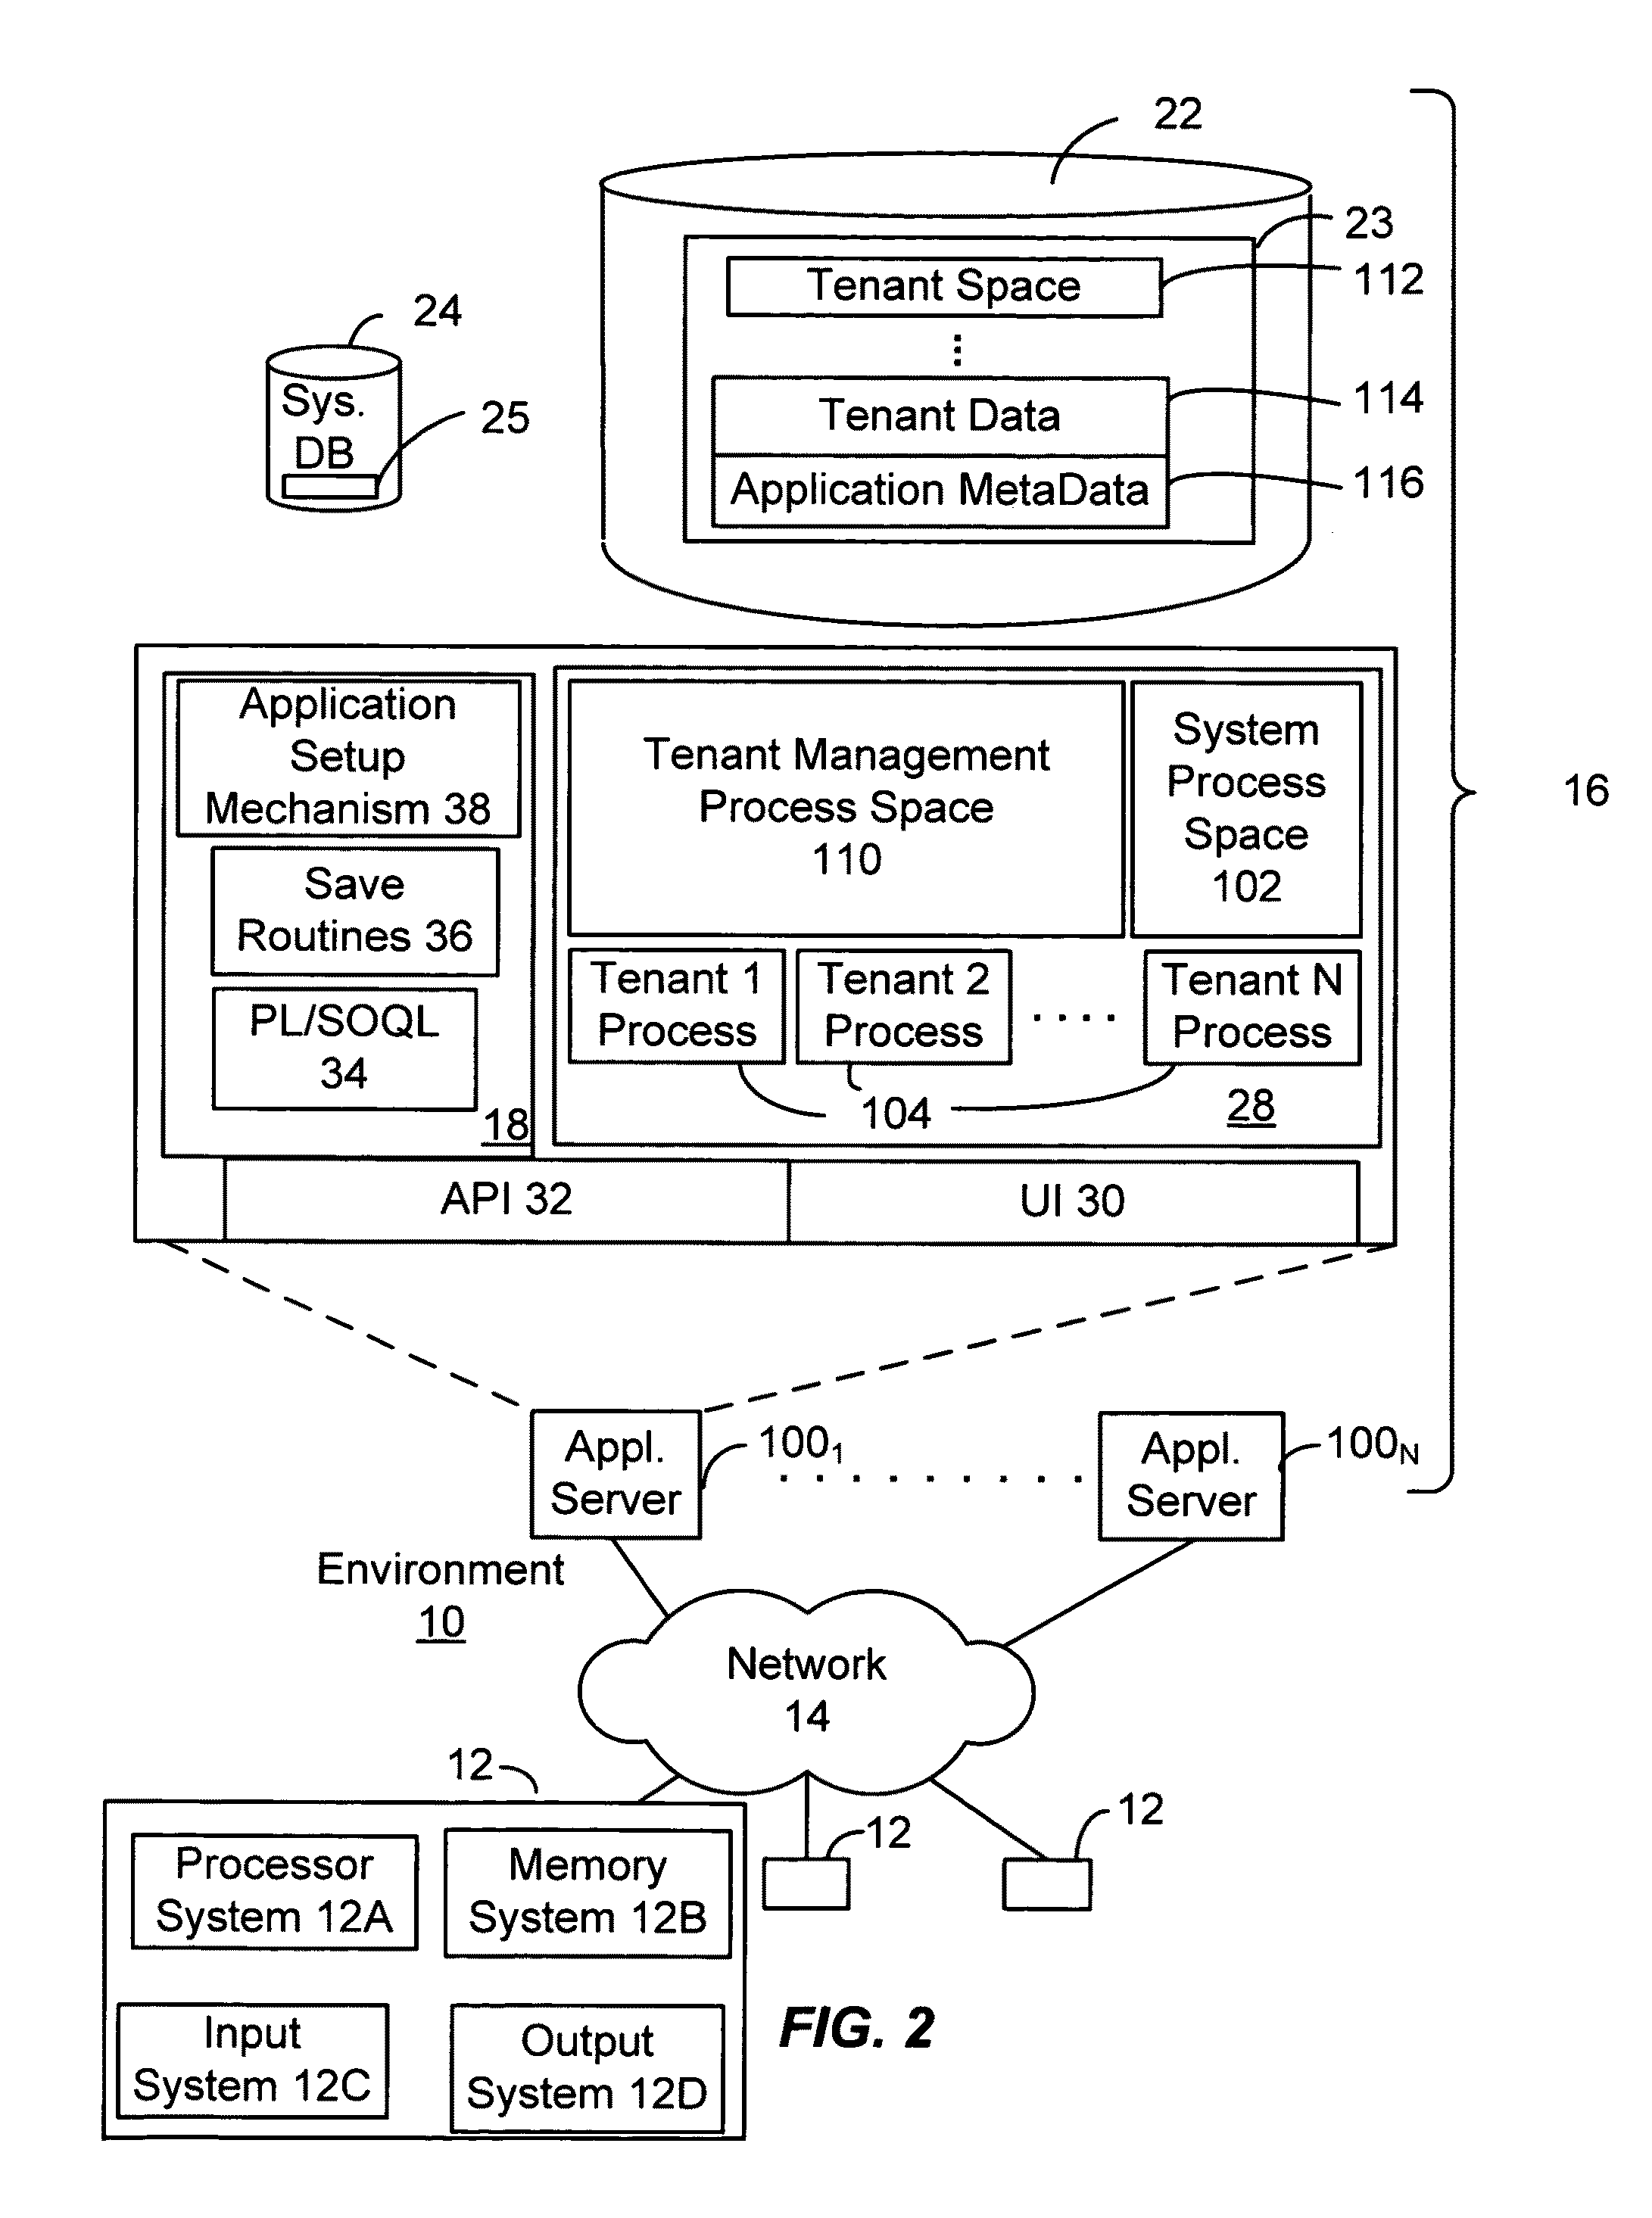 Method and system for apportioning opportunity among campaigns in a CRM system